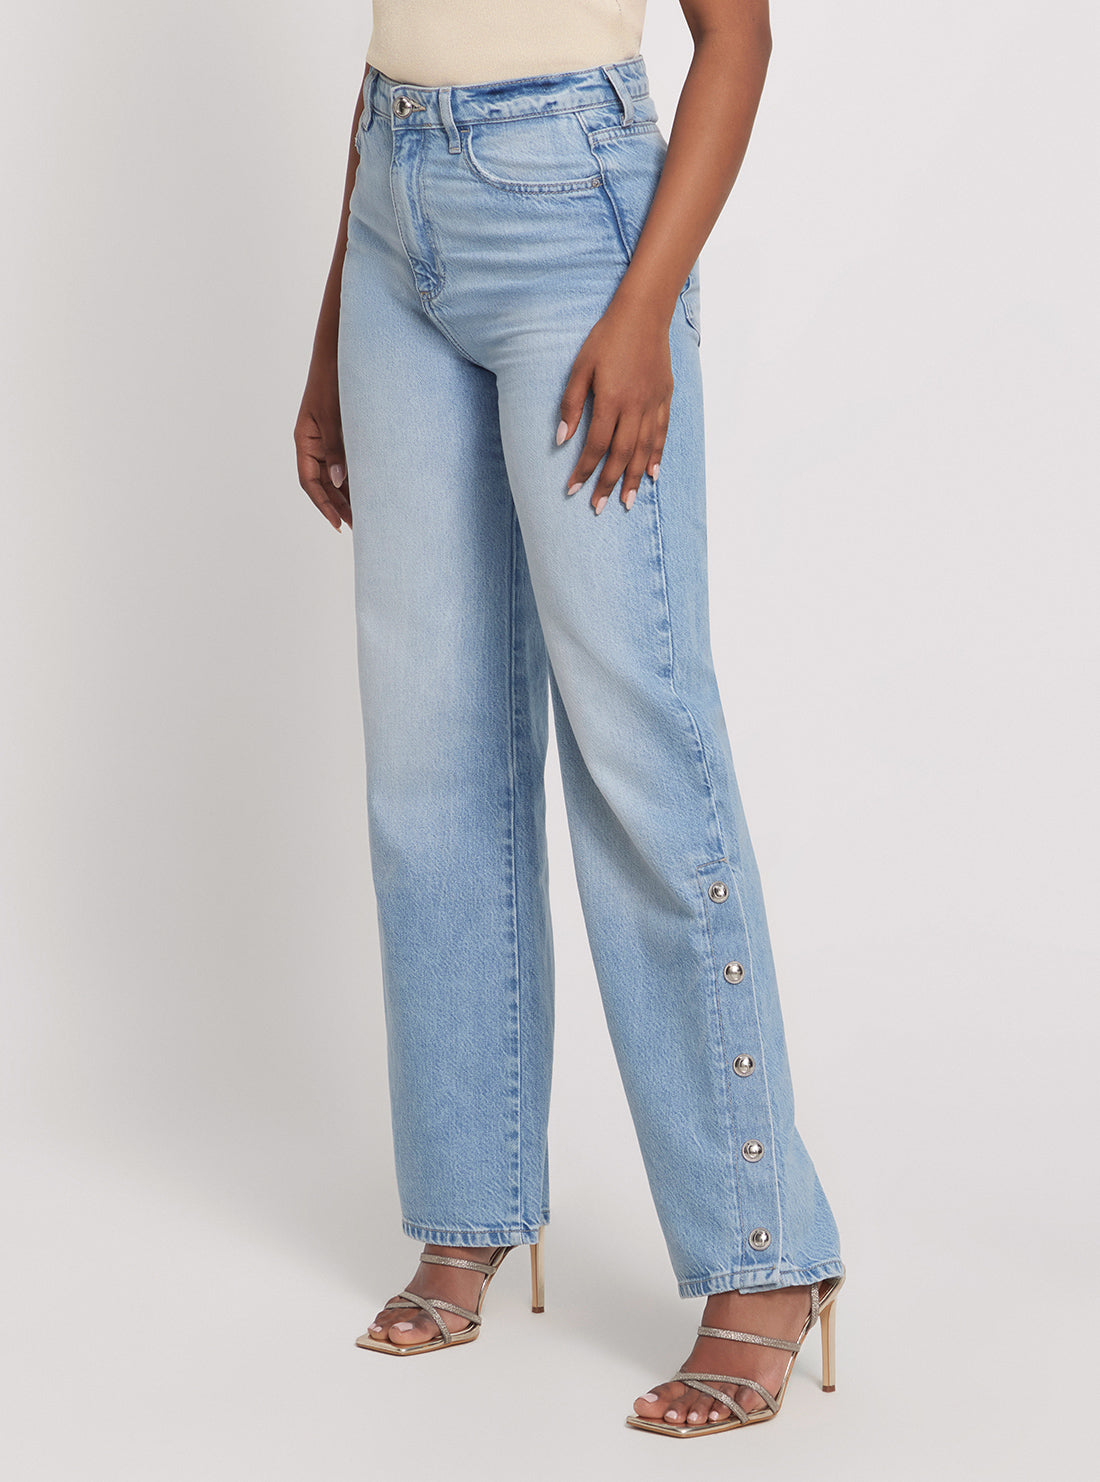 GUESS High-Rise Paz Wide Leg Denim Jeans in Light Wash side view